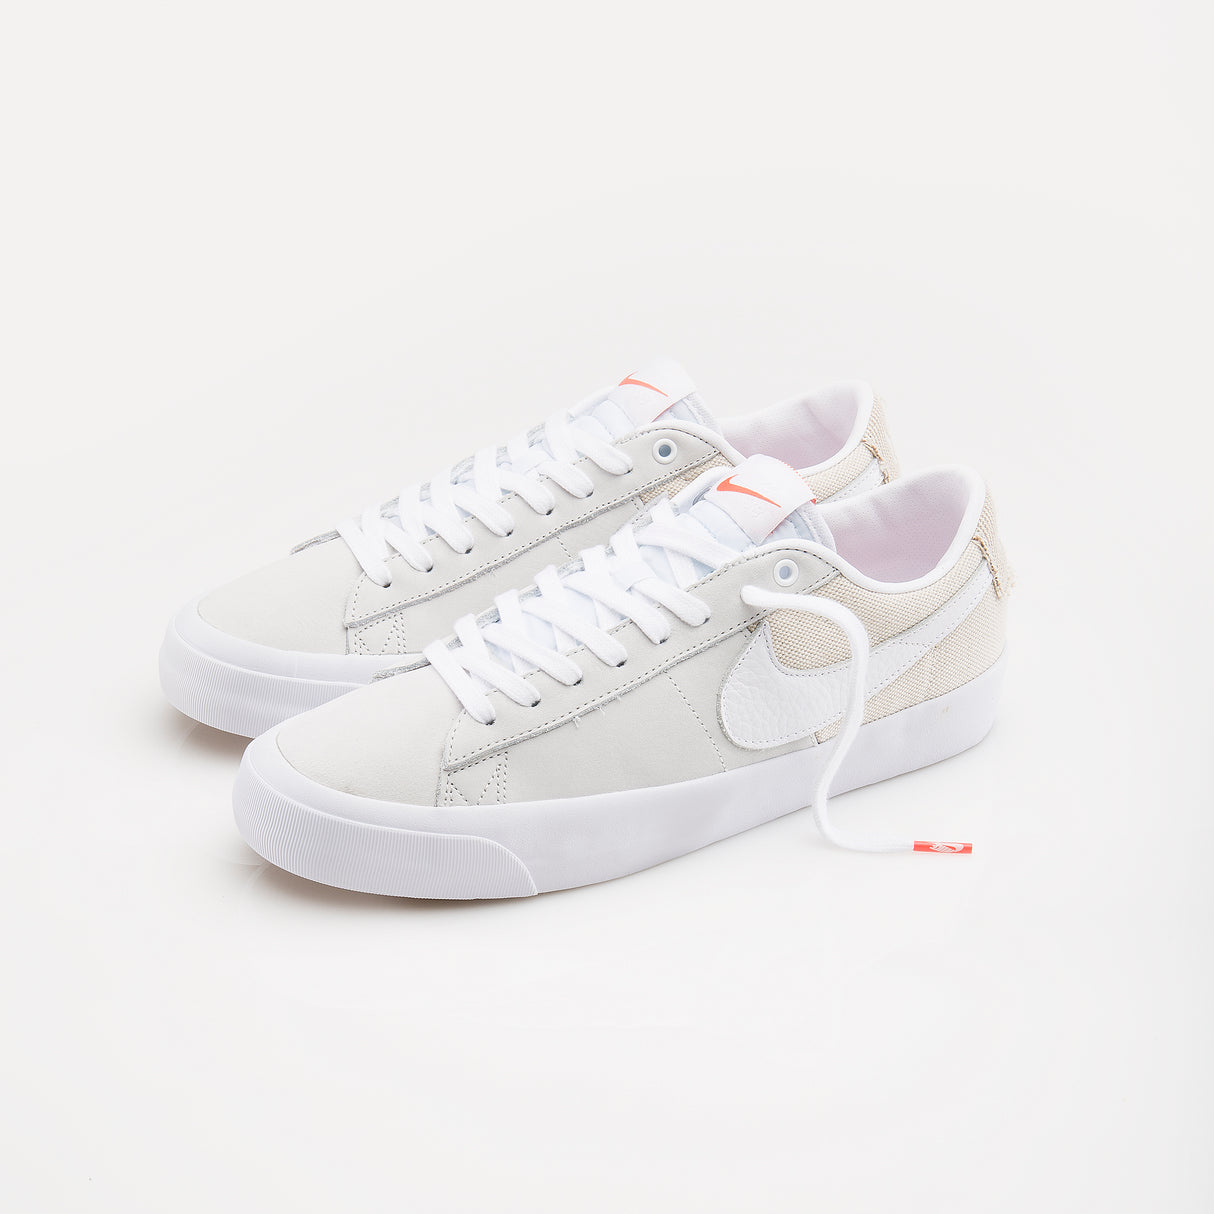 analyse Brood cement Nike SB Blazer Low GT ISO Zoom White/White-Summit White Shoes – Long Beach  Skate Co